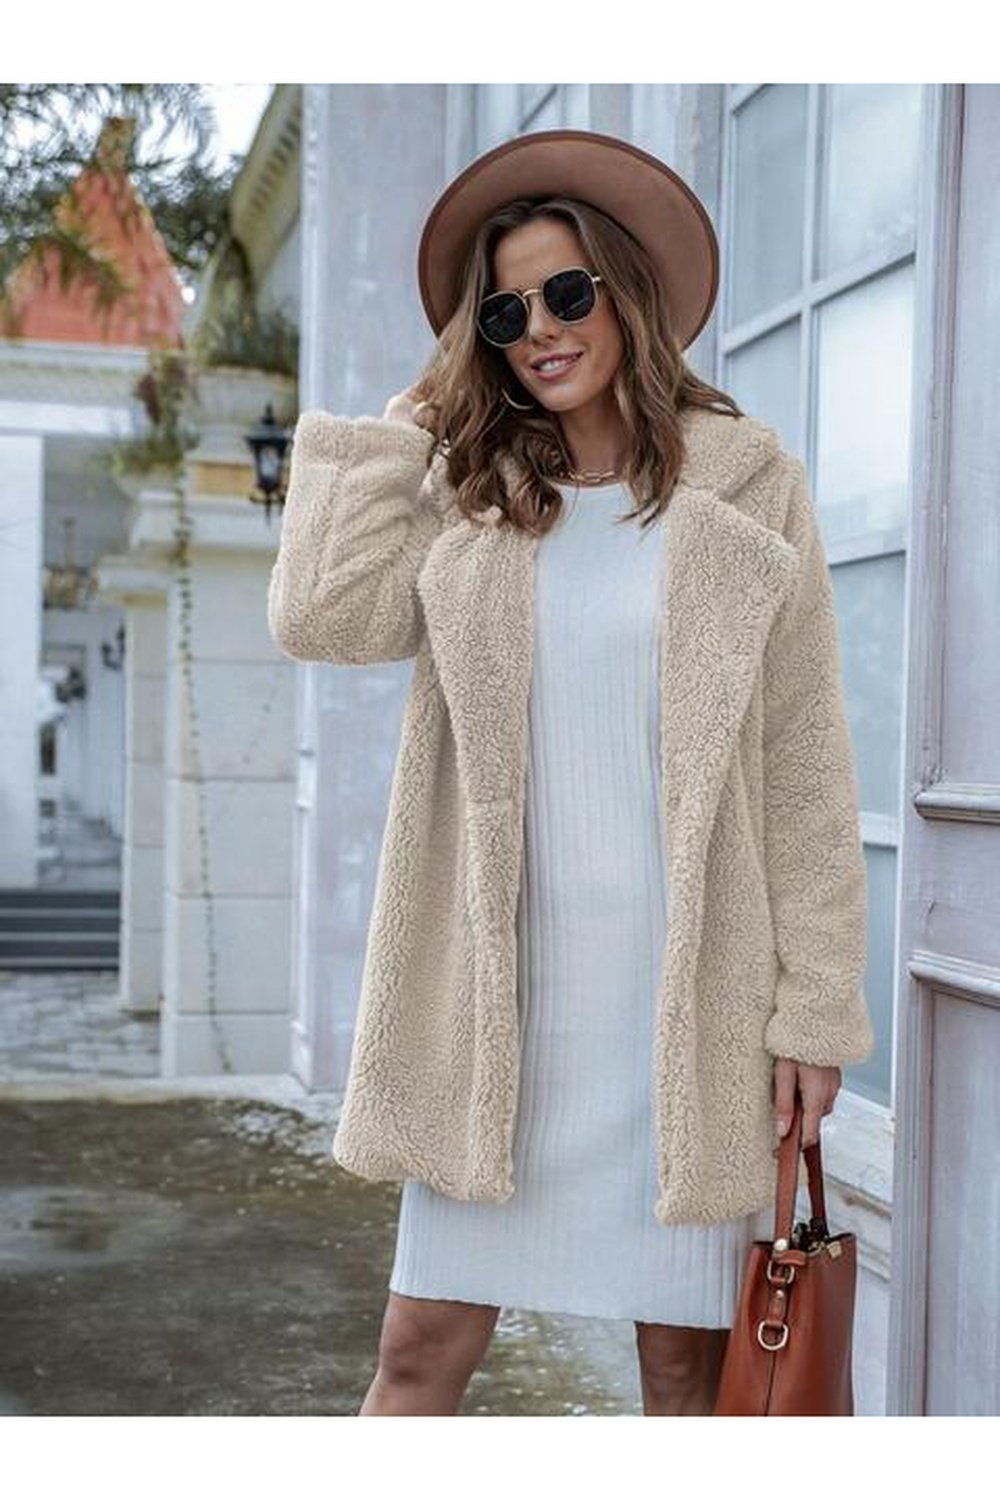 Long Sleeve Teddy Coat with Pockets - Jackets - FITGGINS